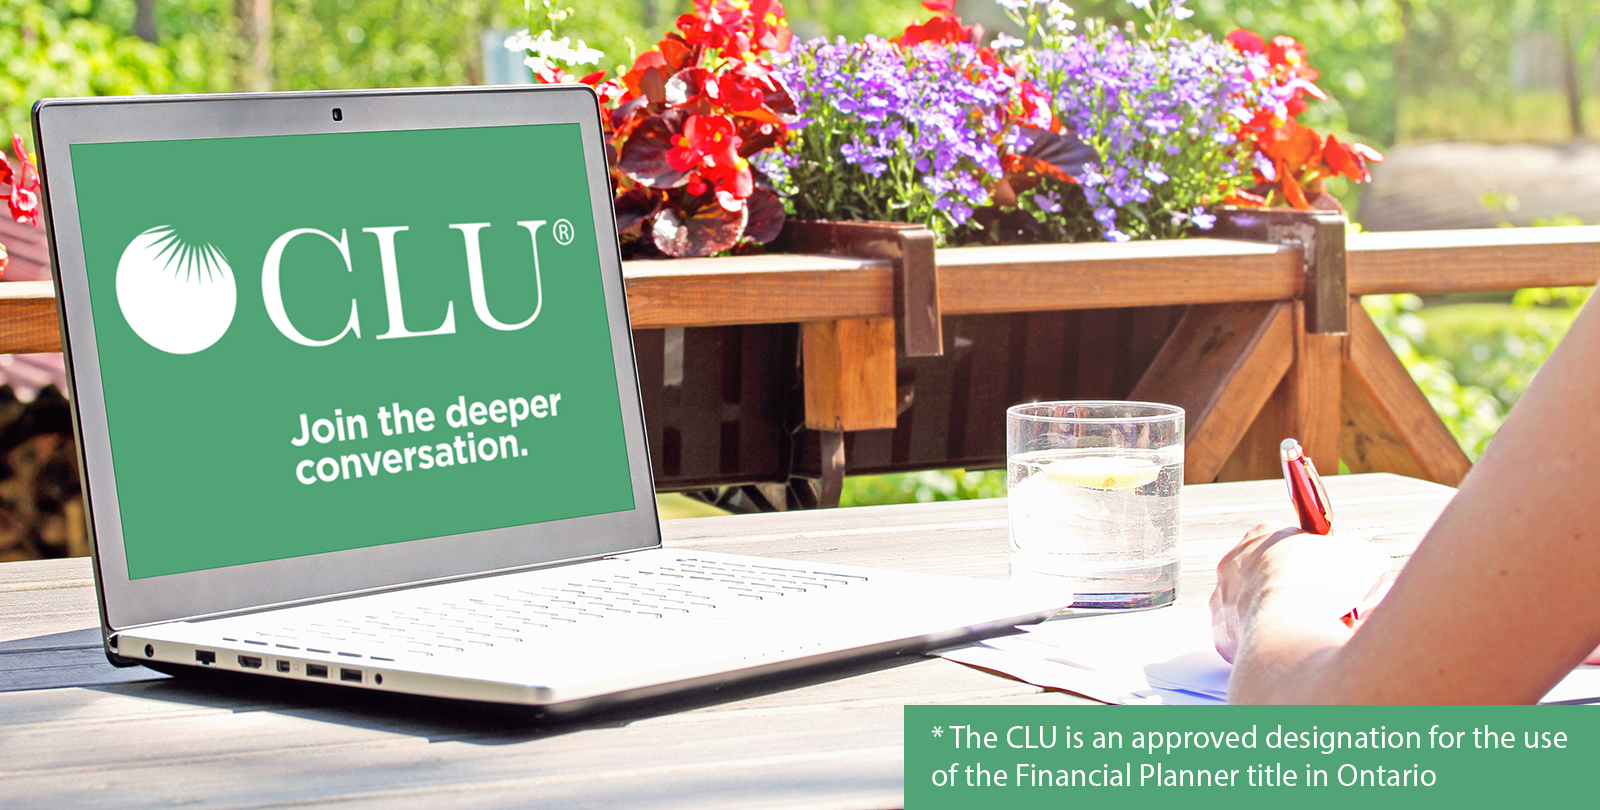 The CLU is an approved designation for the use of the Financial Planner title in Ontario